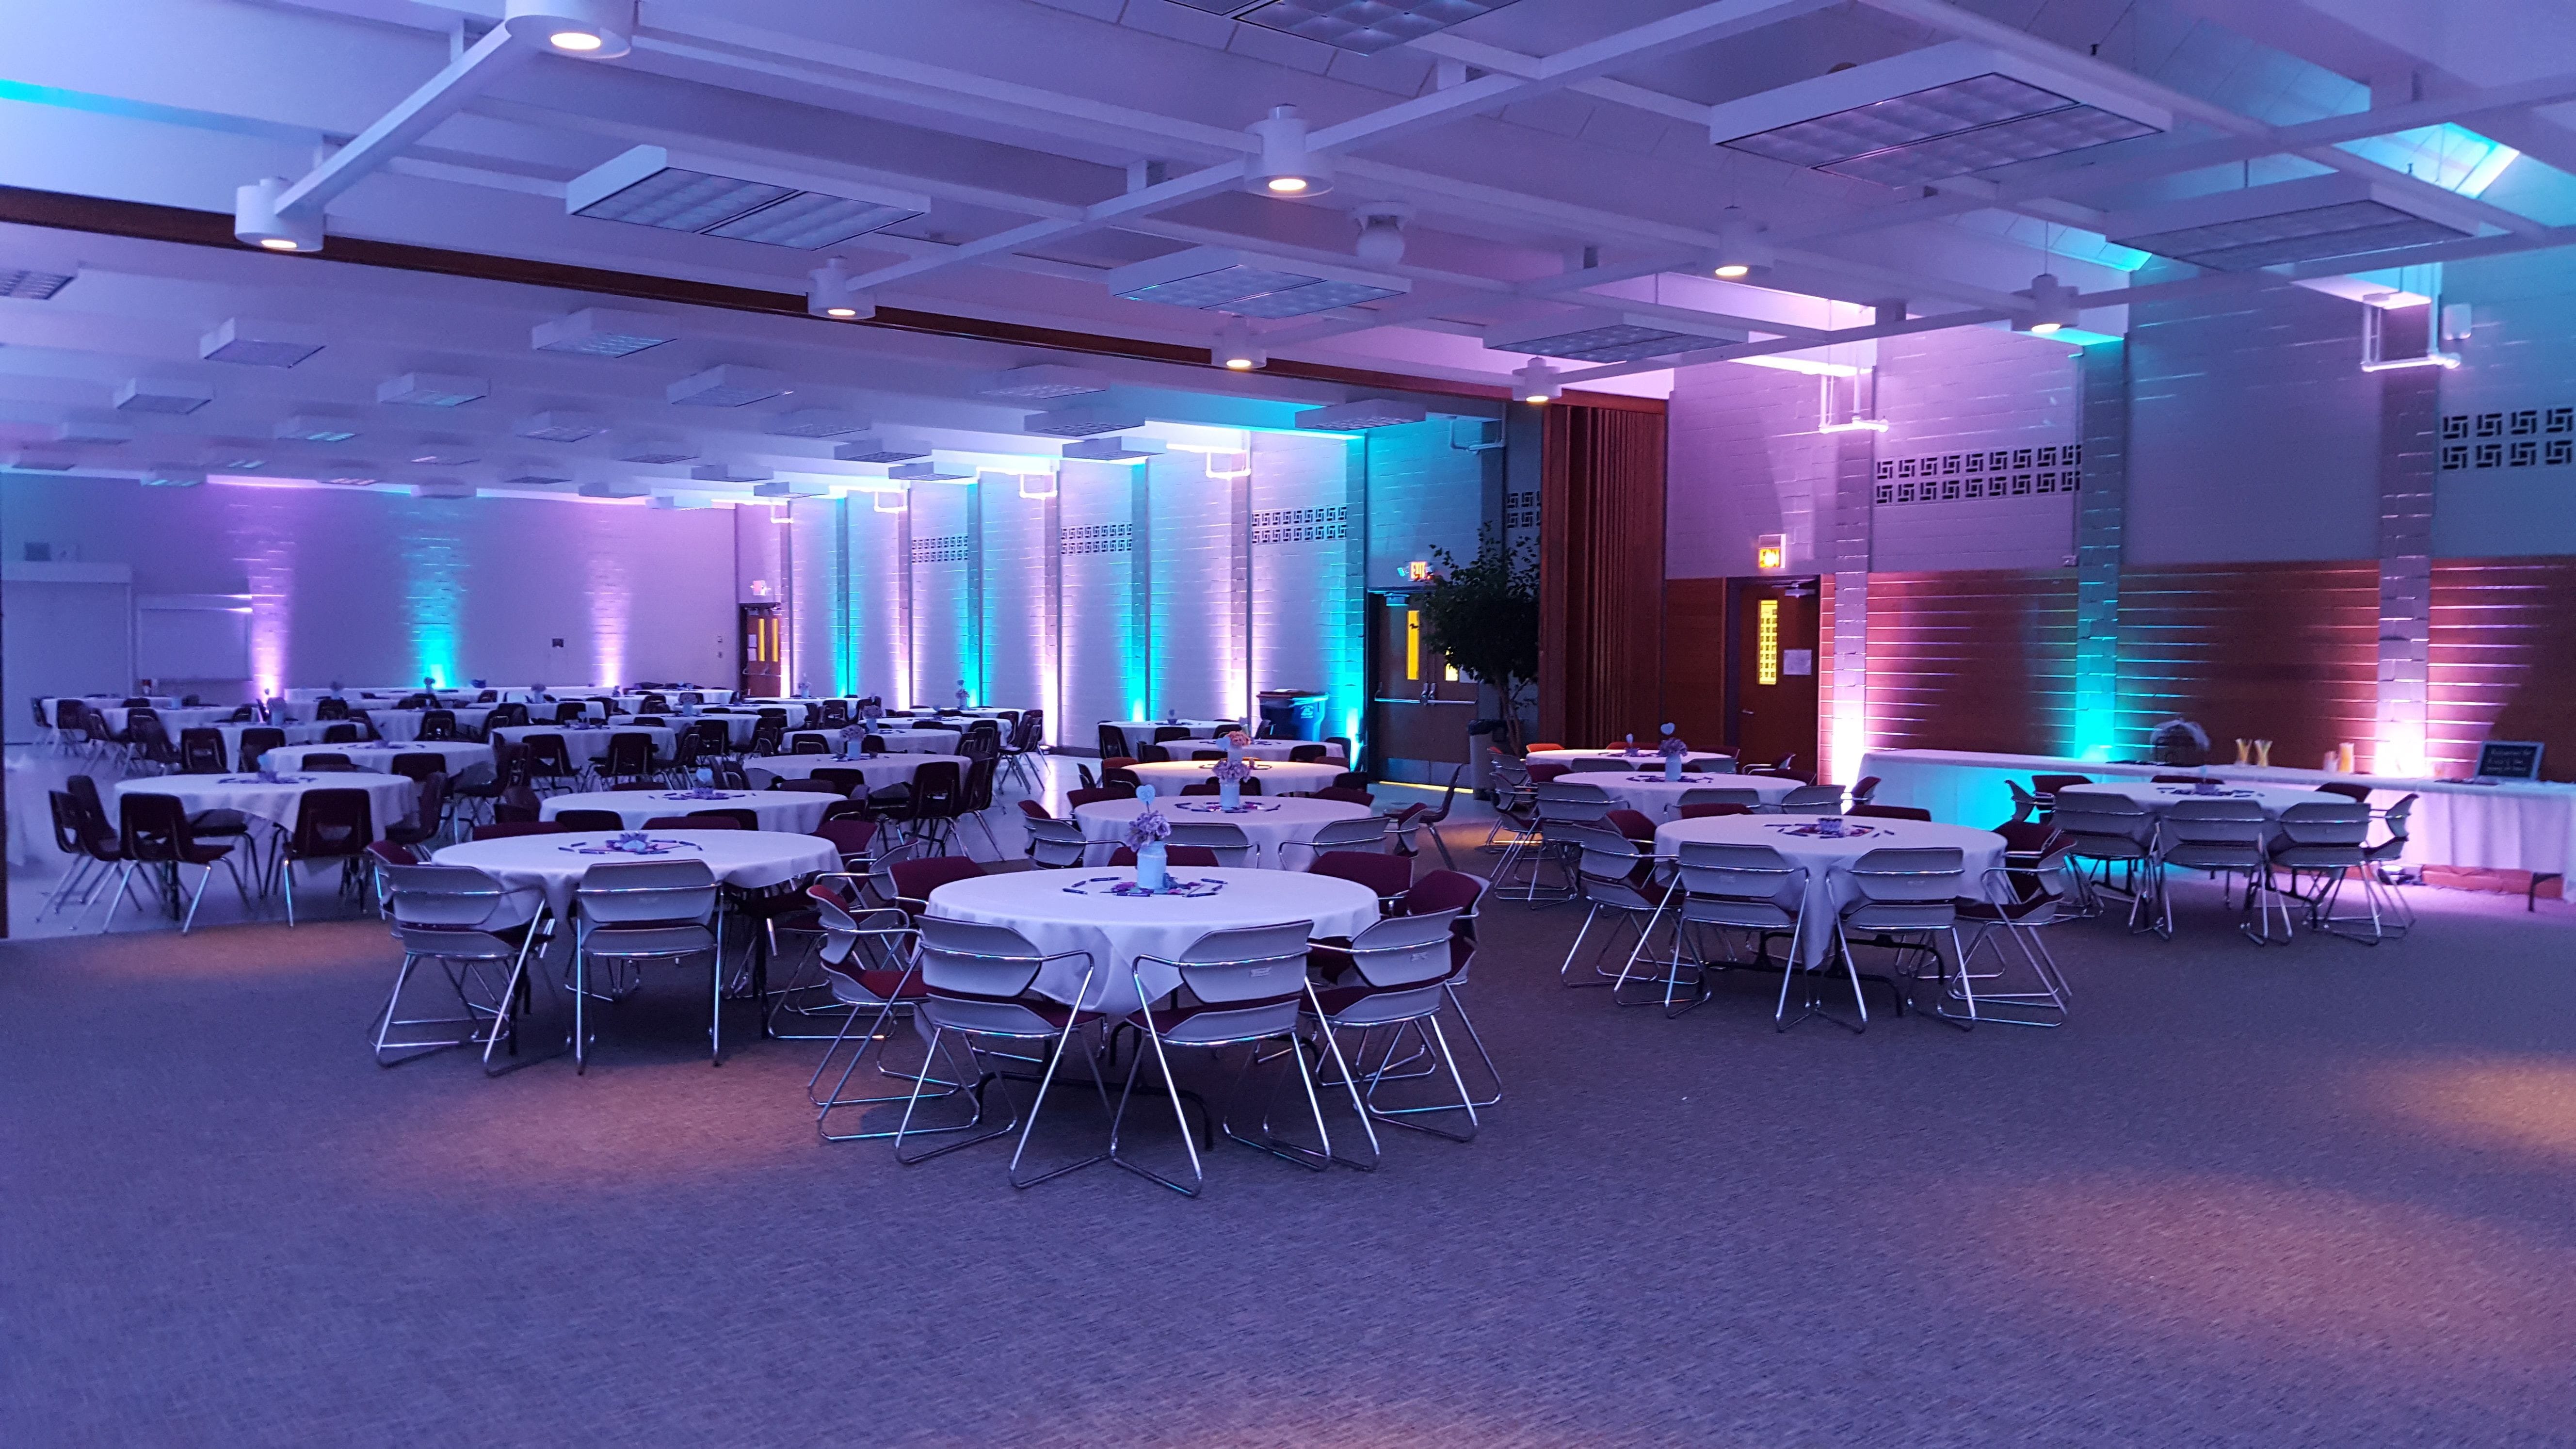 Marshall school cafeteria.
Wedding lighting in teal and lavender.